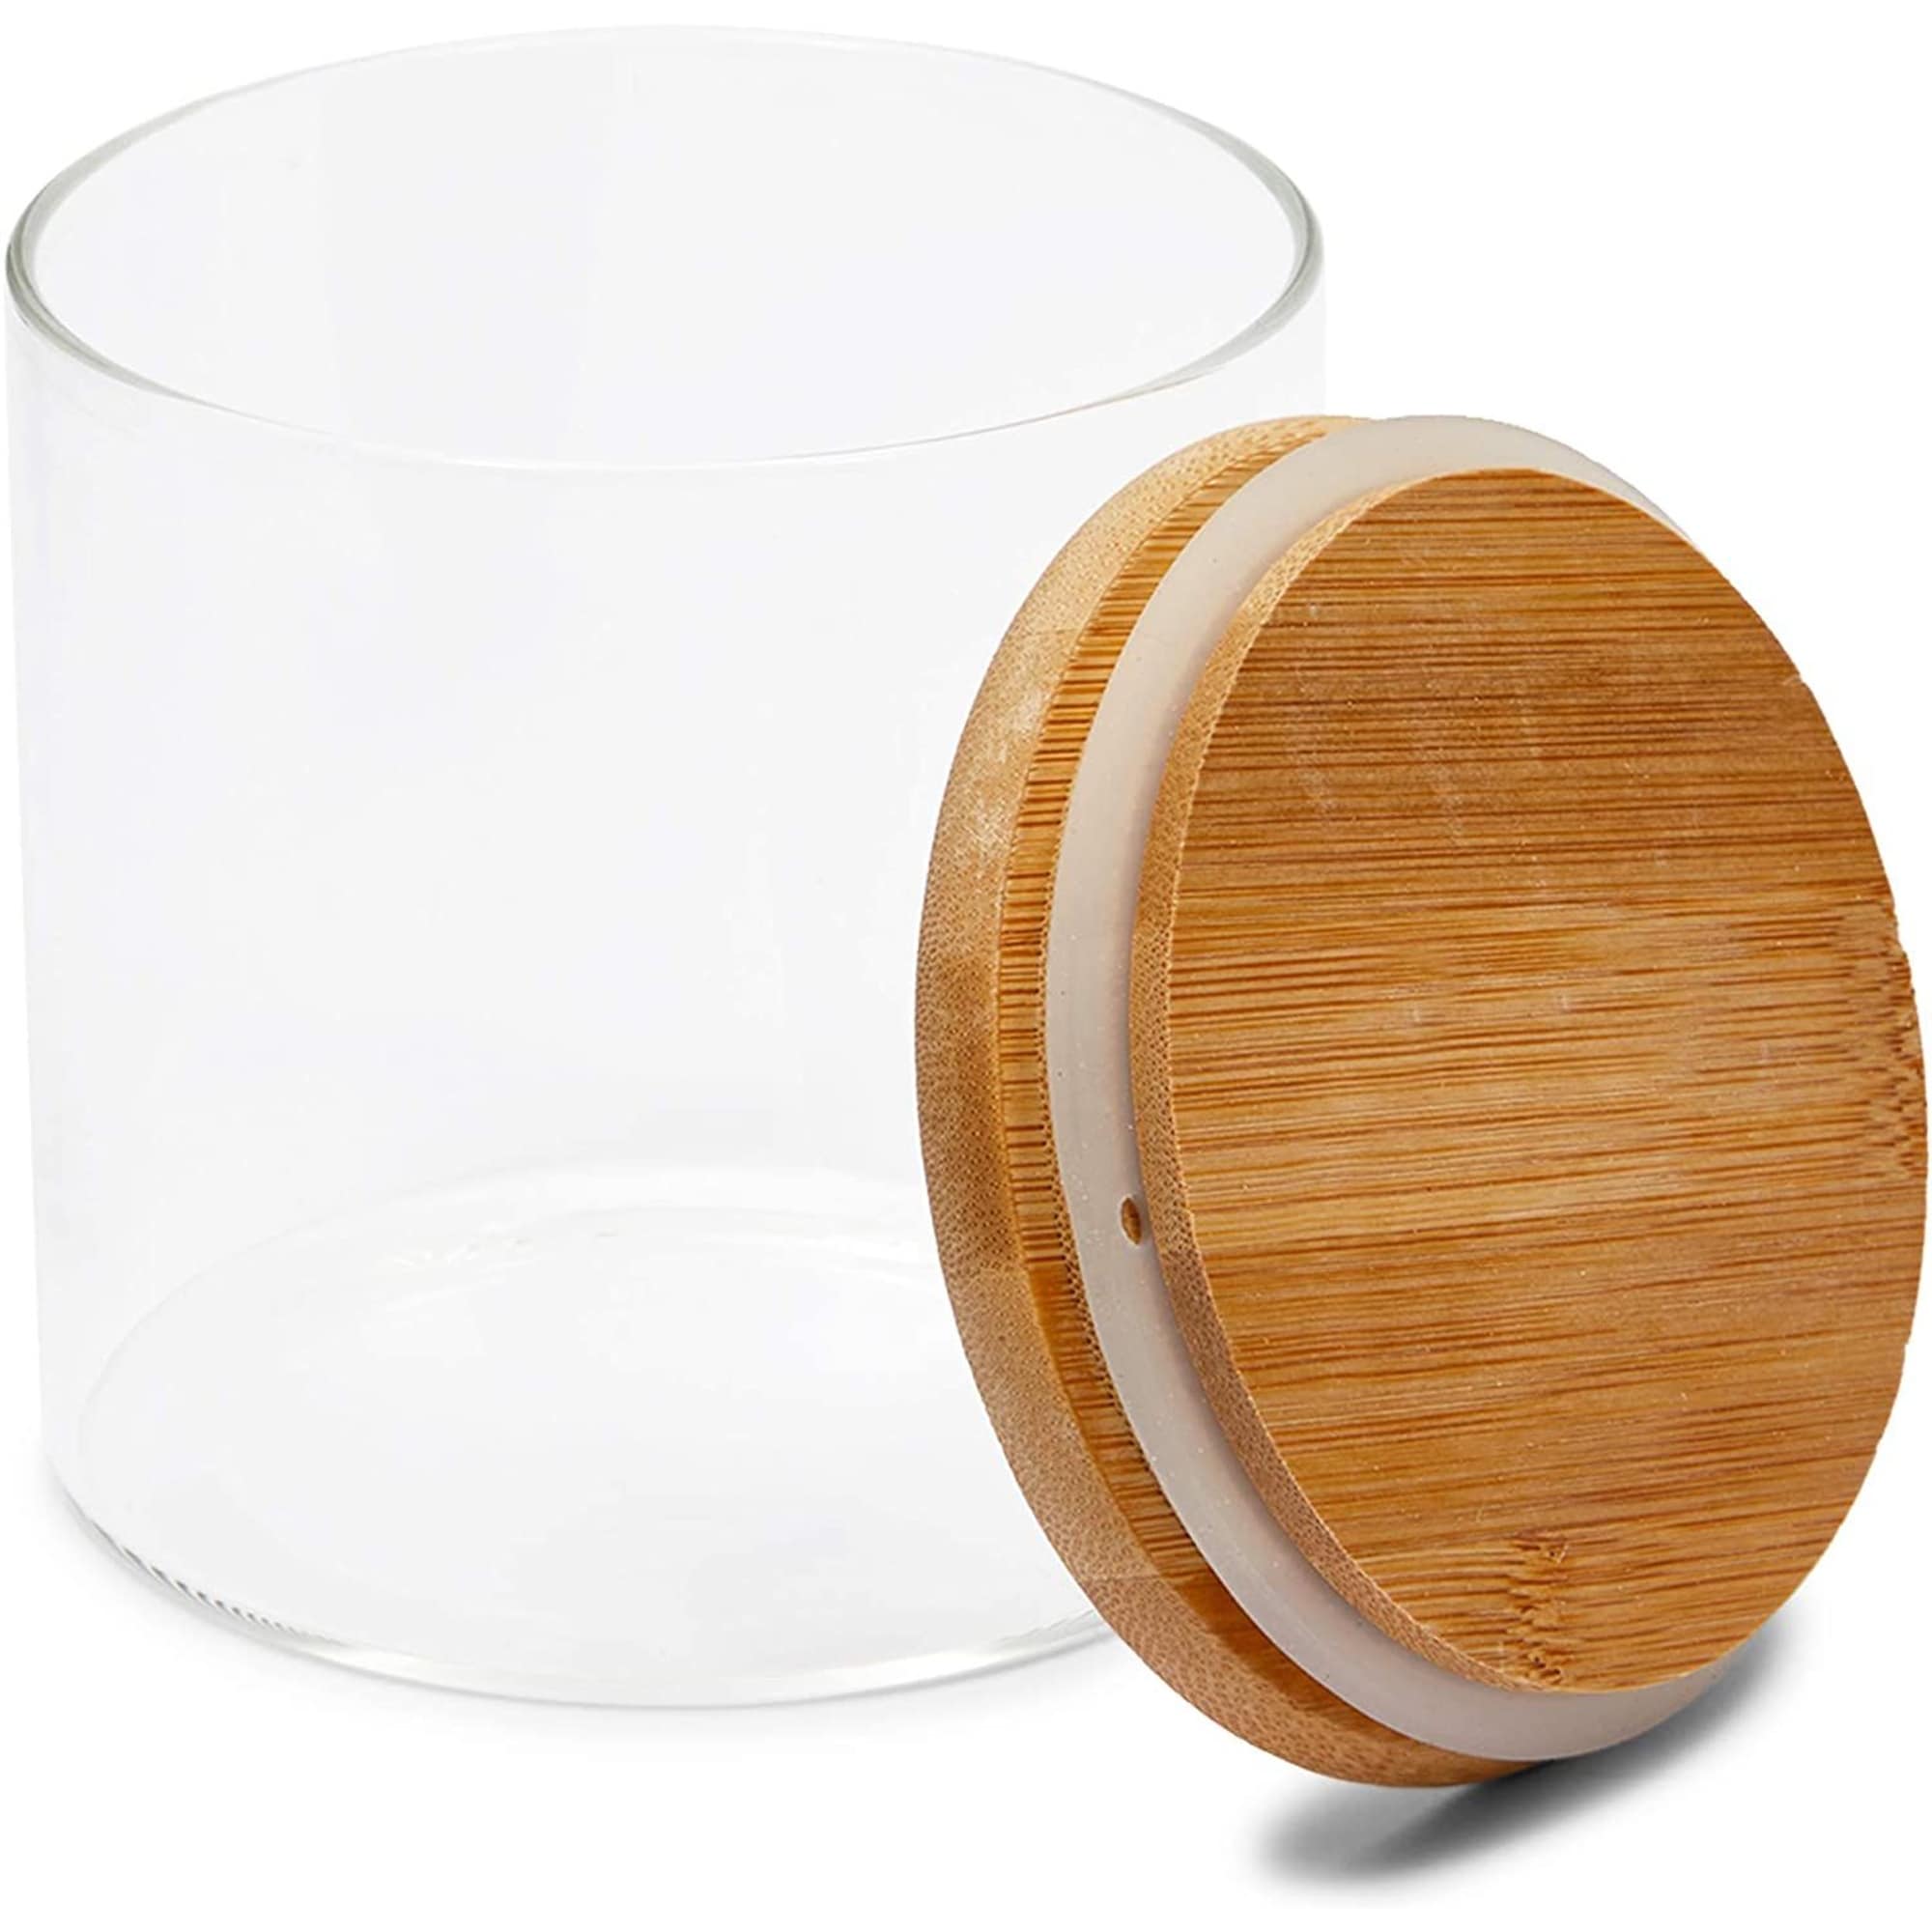 https://ak1.ostkcdn.com/images/products/is/images/direct/b2c62192a793b88f5aaa027f0b60b0384d16febc/Glass-Canisters-with-Airtight-Bamboo-Lids%2C-3-Sizes-for-Pantry-Storage-%285-Pack%29.jpg